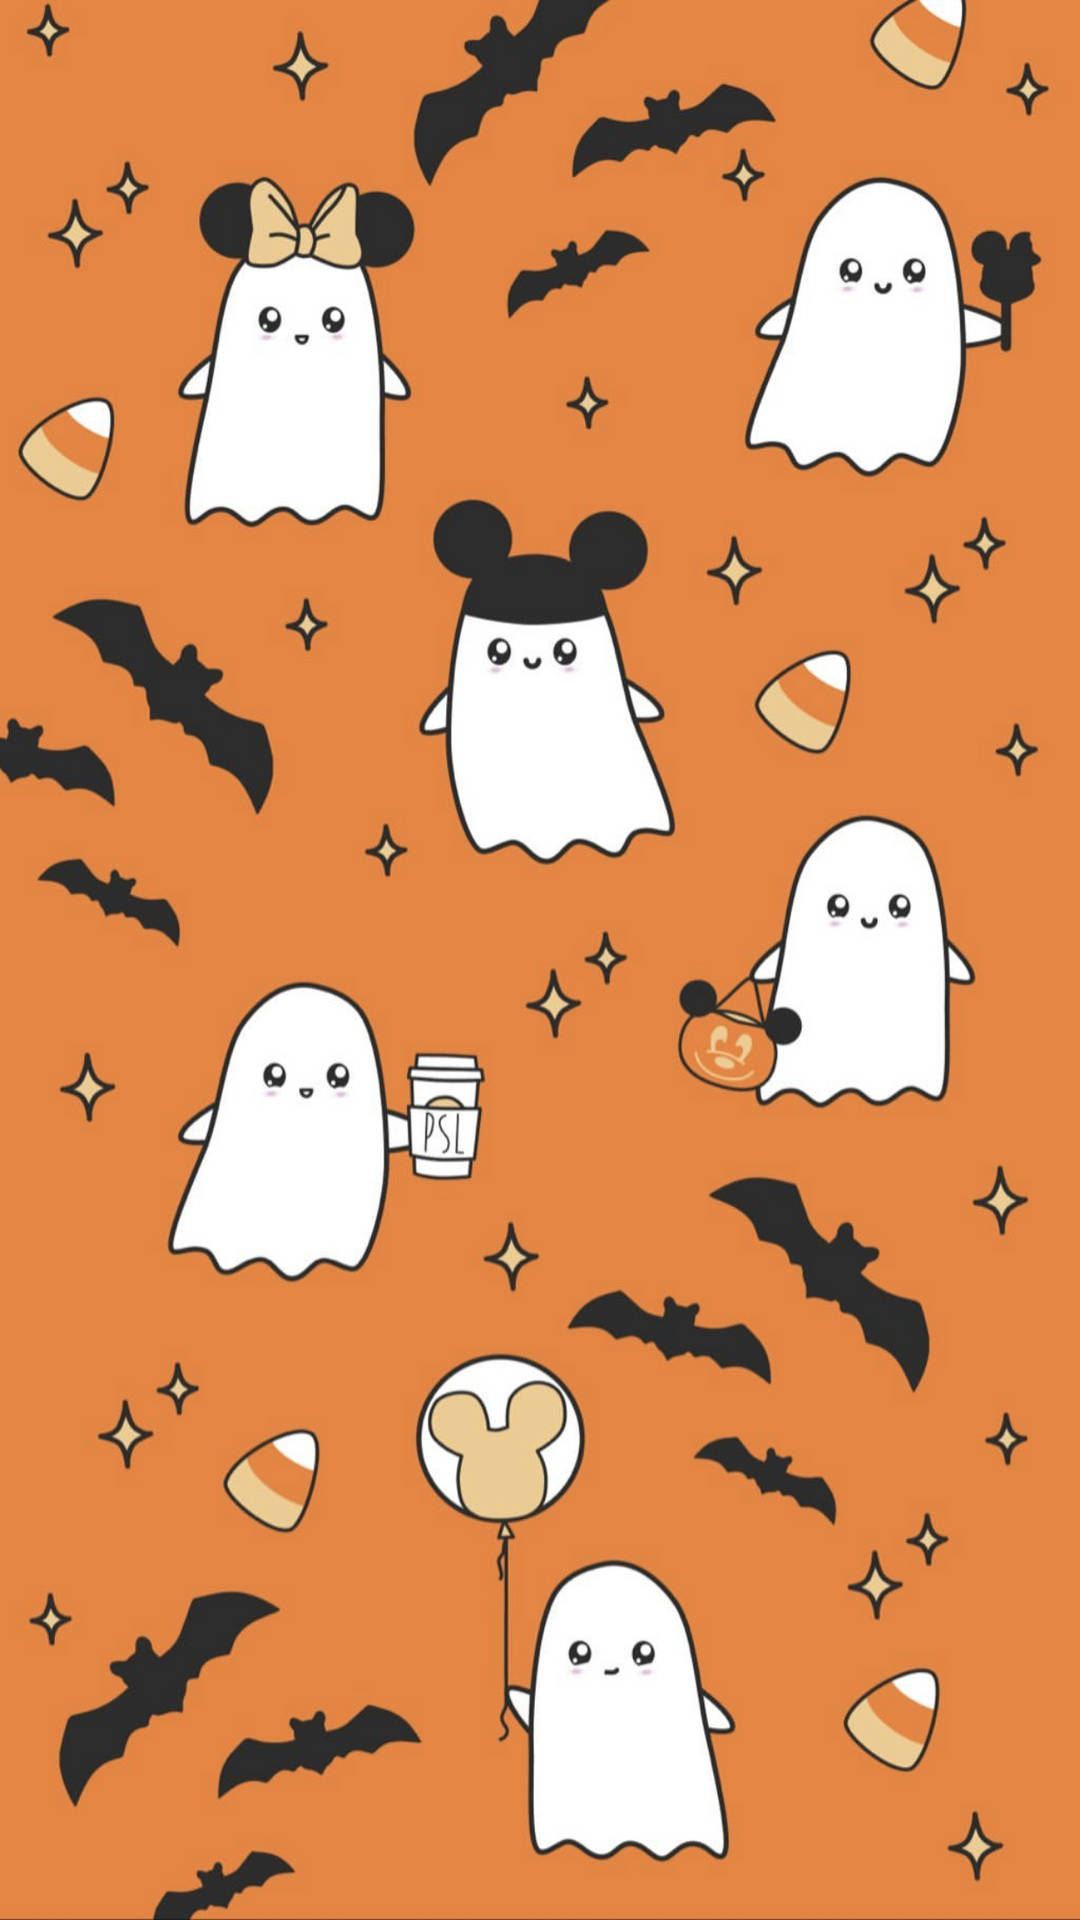 Simple wallpaper for Halloween  ghosts and pumpkins